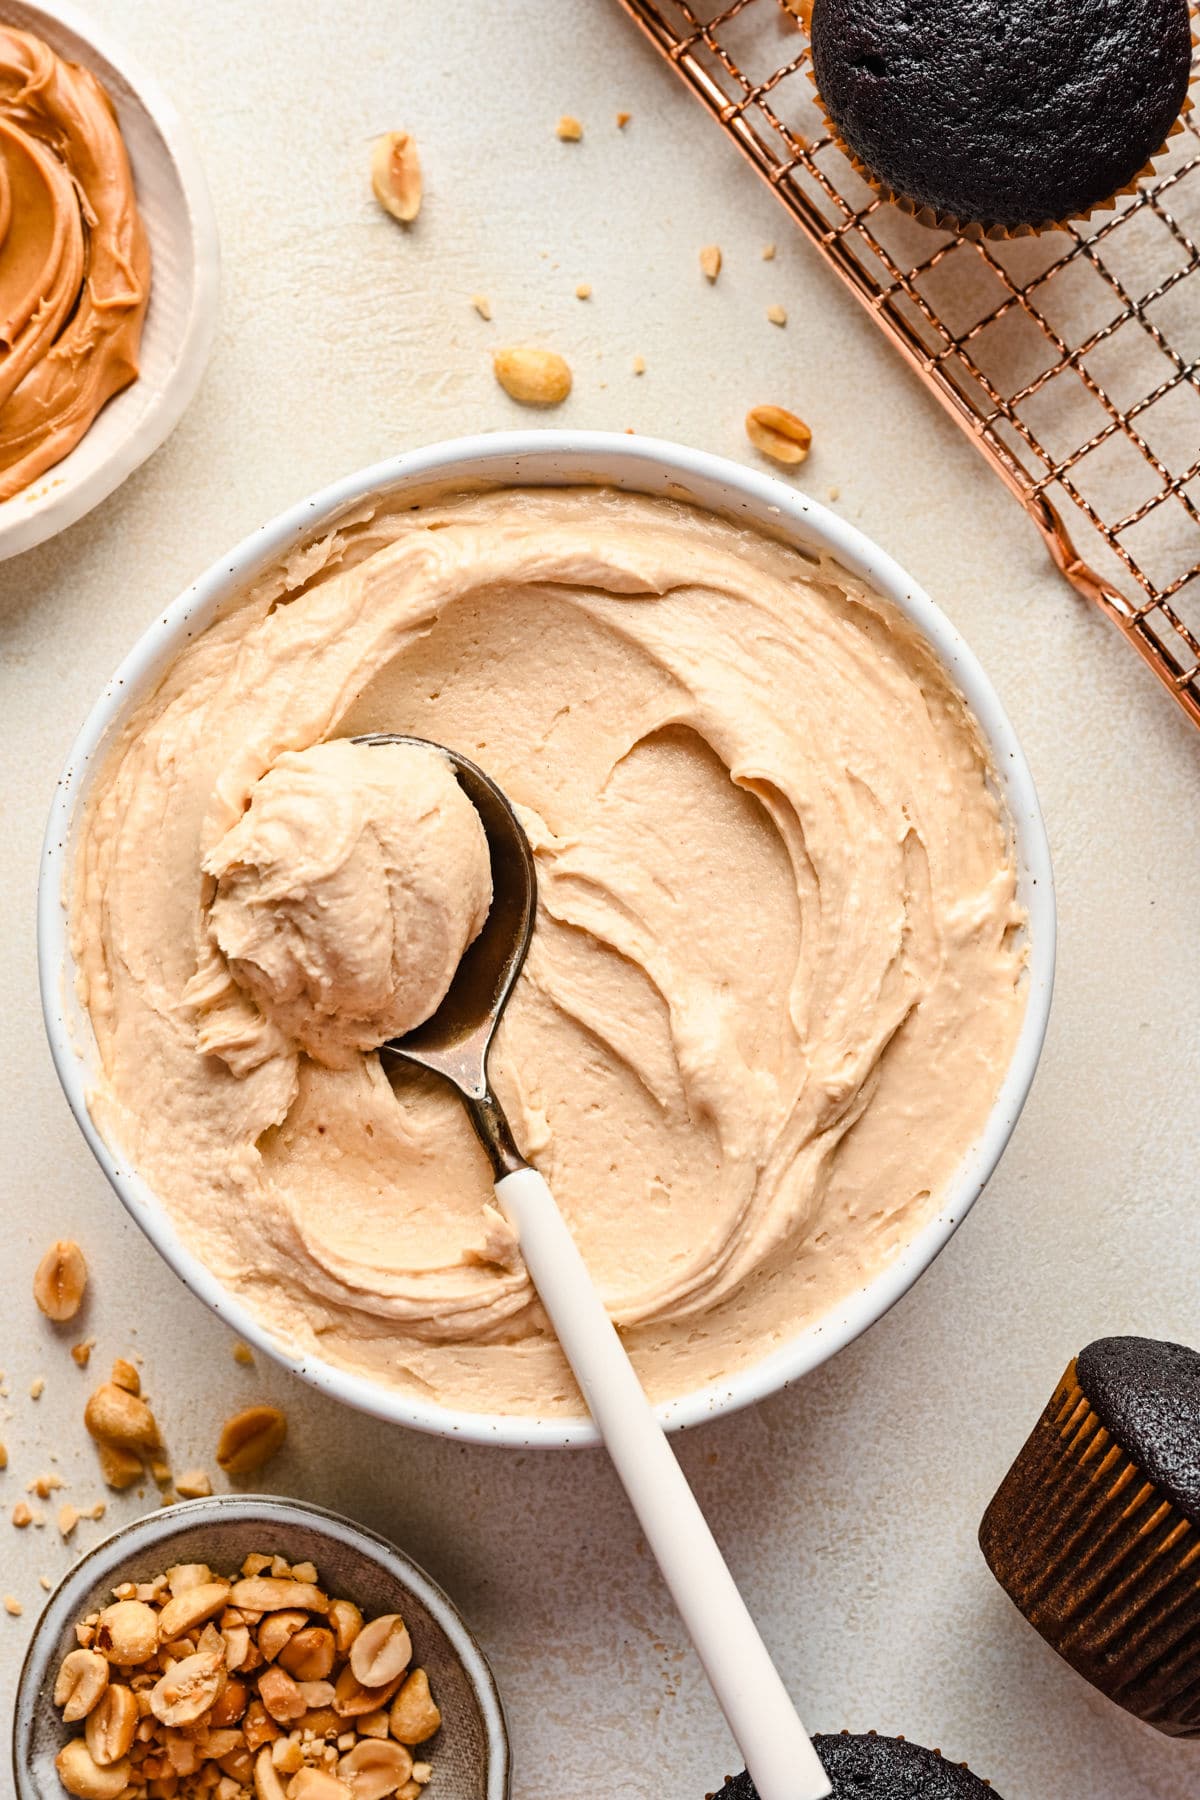 A spoon scooping up peanut butter frosting in a white dish.